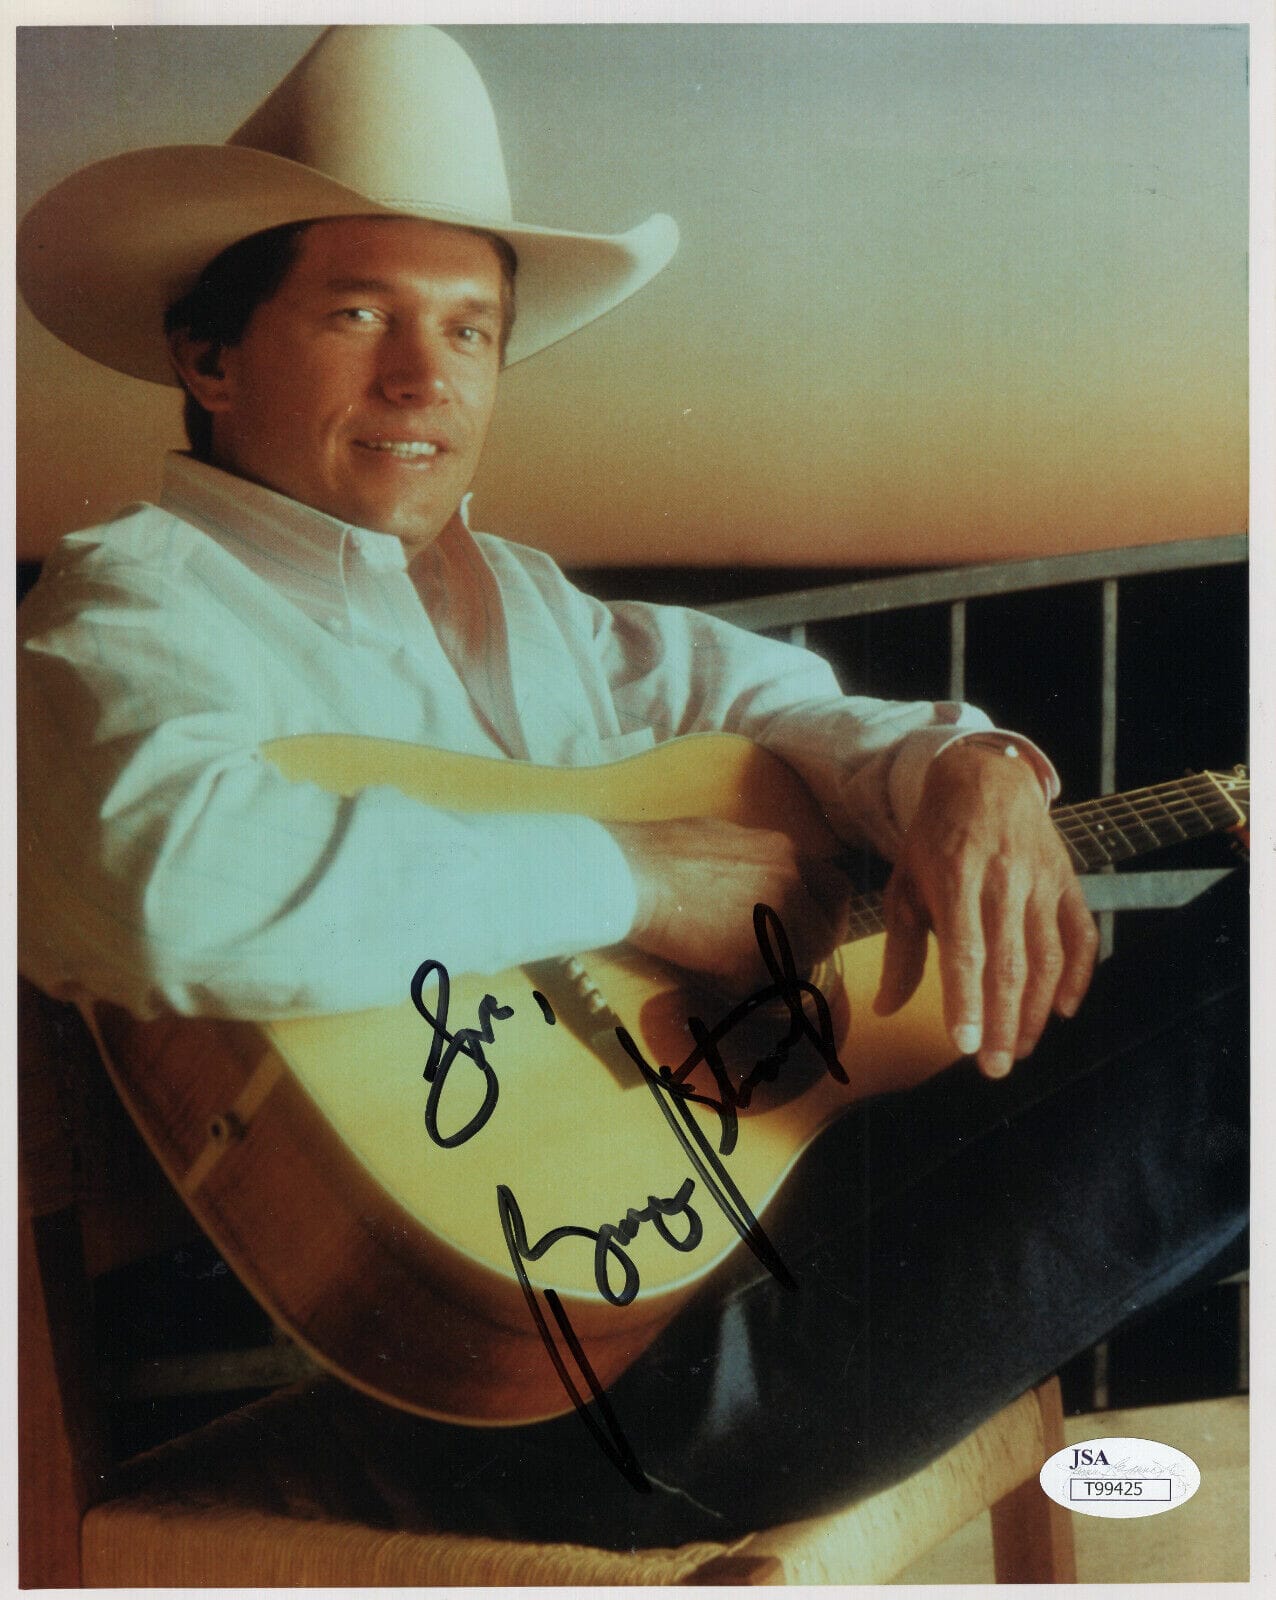 GEORGE STRAIT HAND SIGNED 8×10 COLOR PHOTO YOUNG+HANDSOME SINGER JSA COLLECTIBLE MEMORABILIA